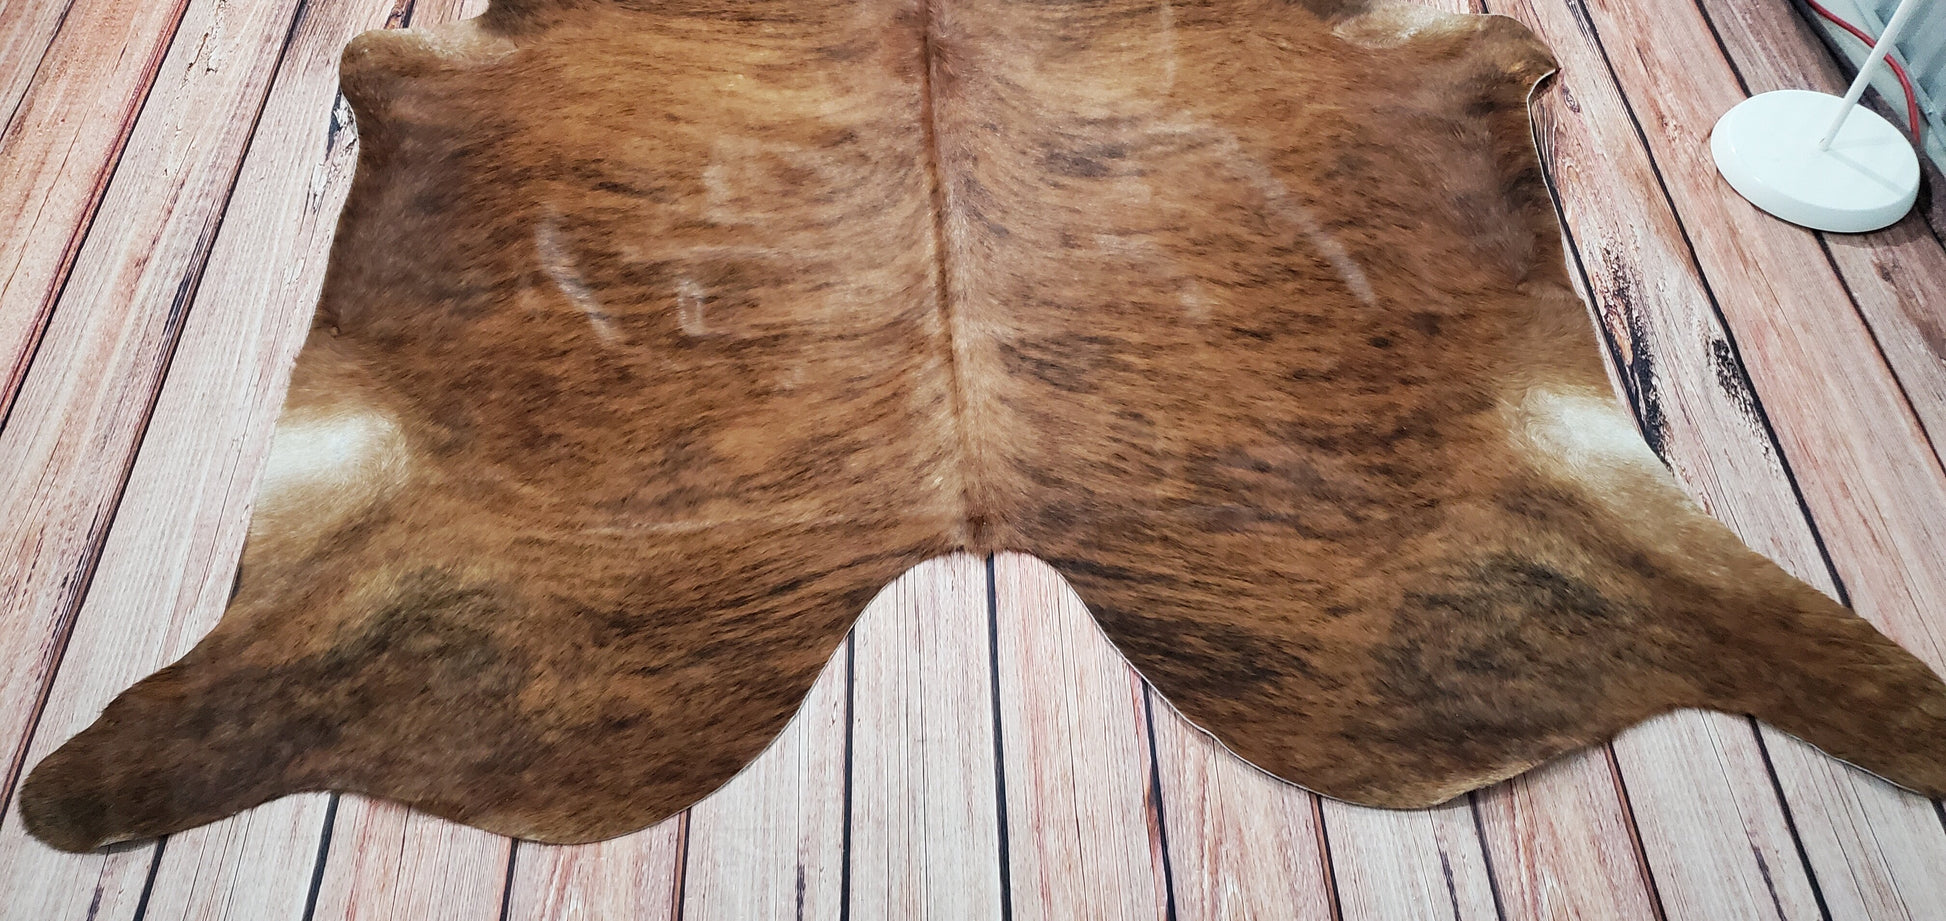 Transform your home with our real and genuine brown brindle cowhide rugs! Discover the many ways you can style them to create the perfect look for any room.